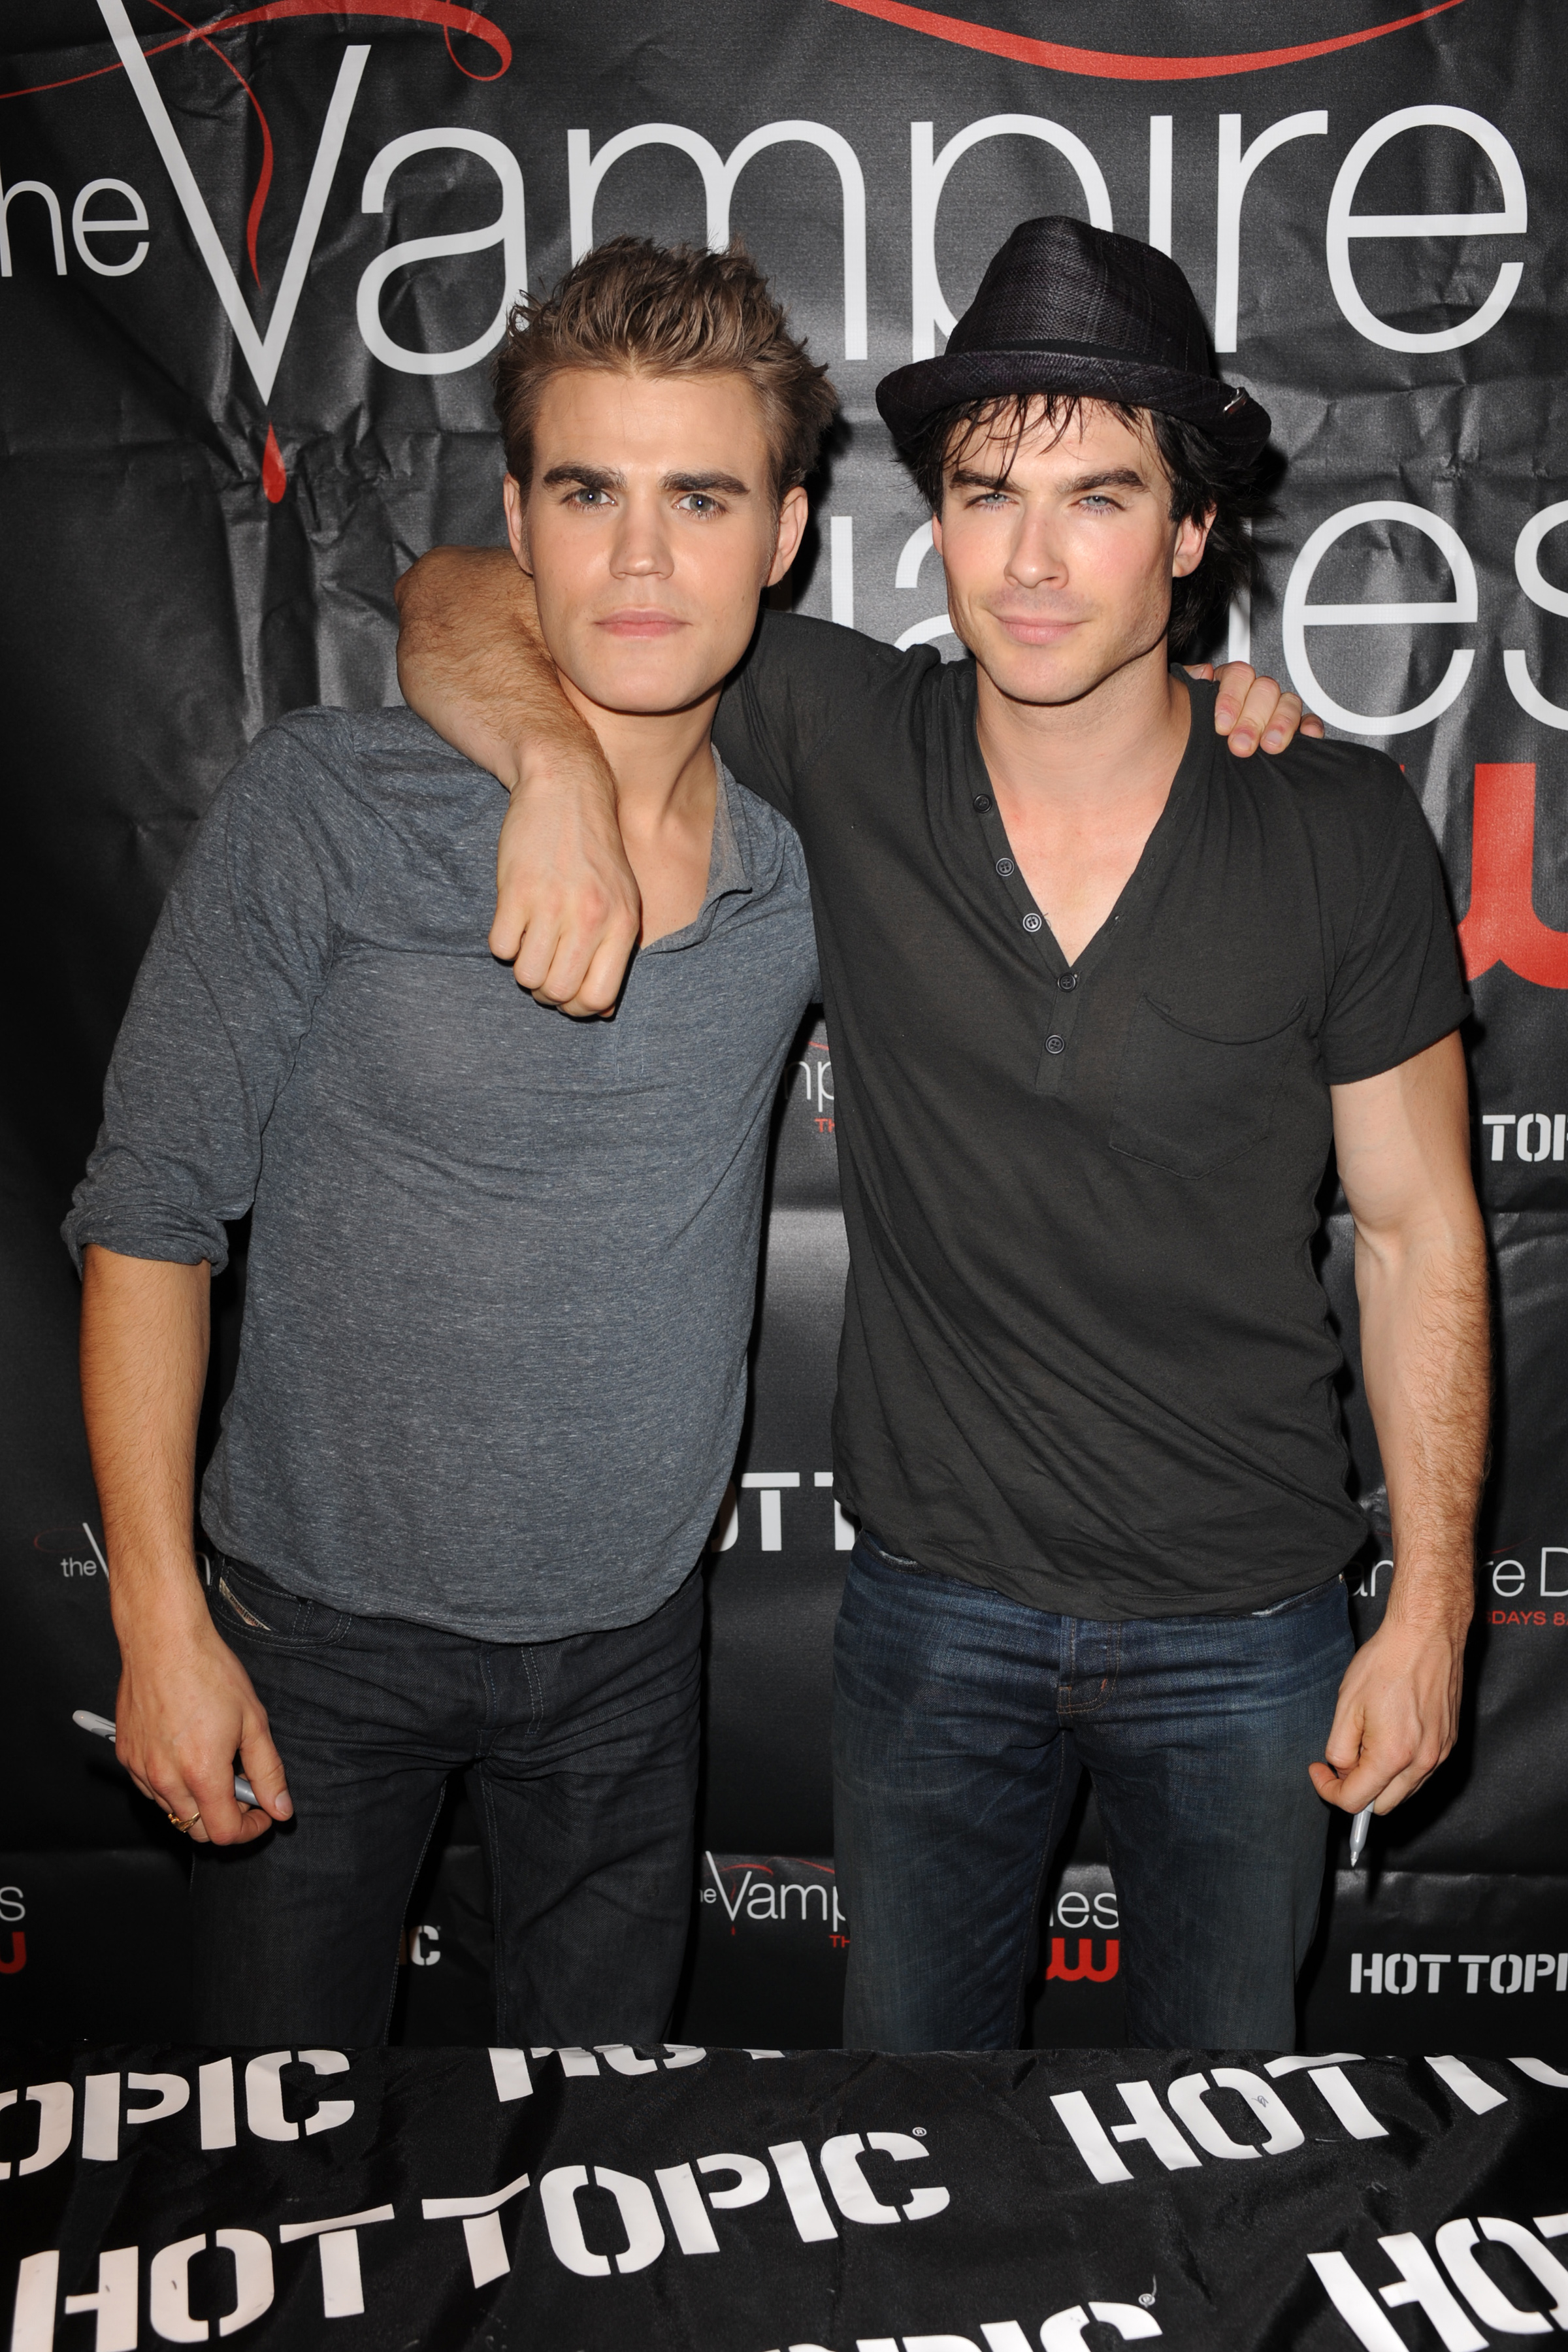 Ian and Paul Wesley at a media event